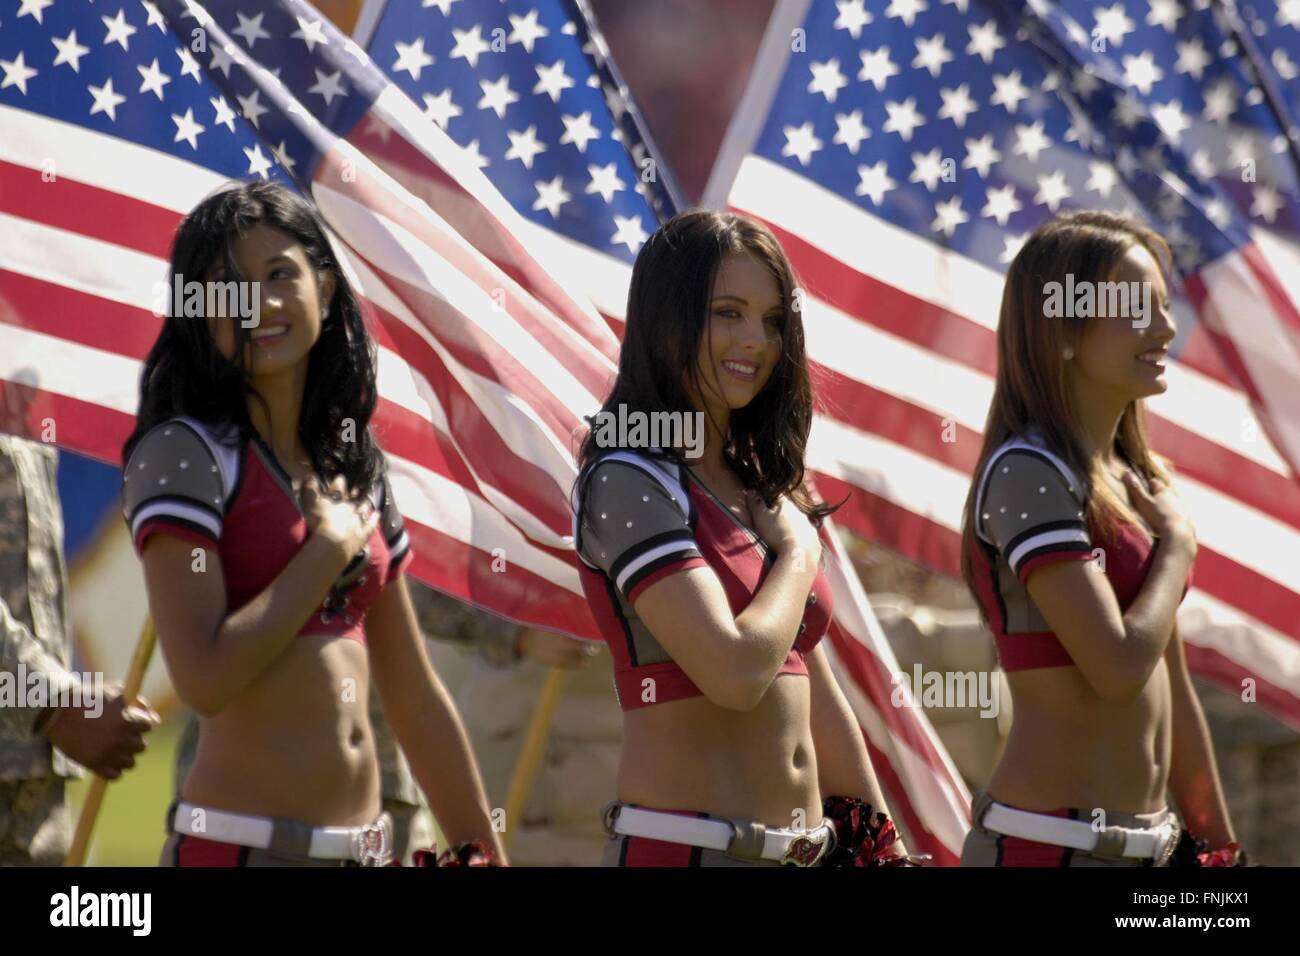 Tampa, Florida, USA. 19th Nov, 2006. Nov. 19, 2006; Tampa, FL, USA; Tampa Bay Buccaneers cheerleaders during the National Anthem prior to the start of the Bucs game against the Washington Redskins at Raymond James Stadium. ZUMA Press/Scott A. Miller © Scott A. Miller/ZUMA Wire/Alamy Live News Stock Photo